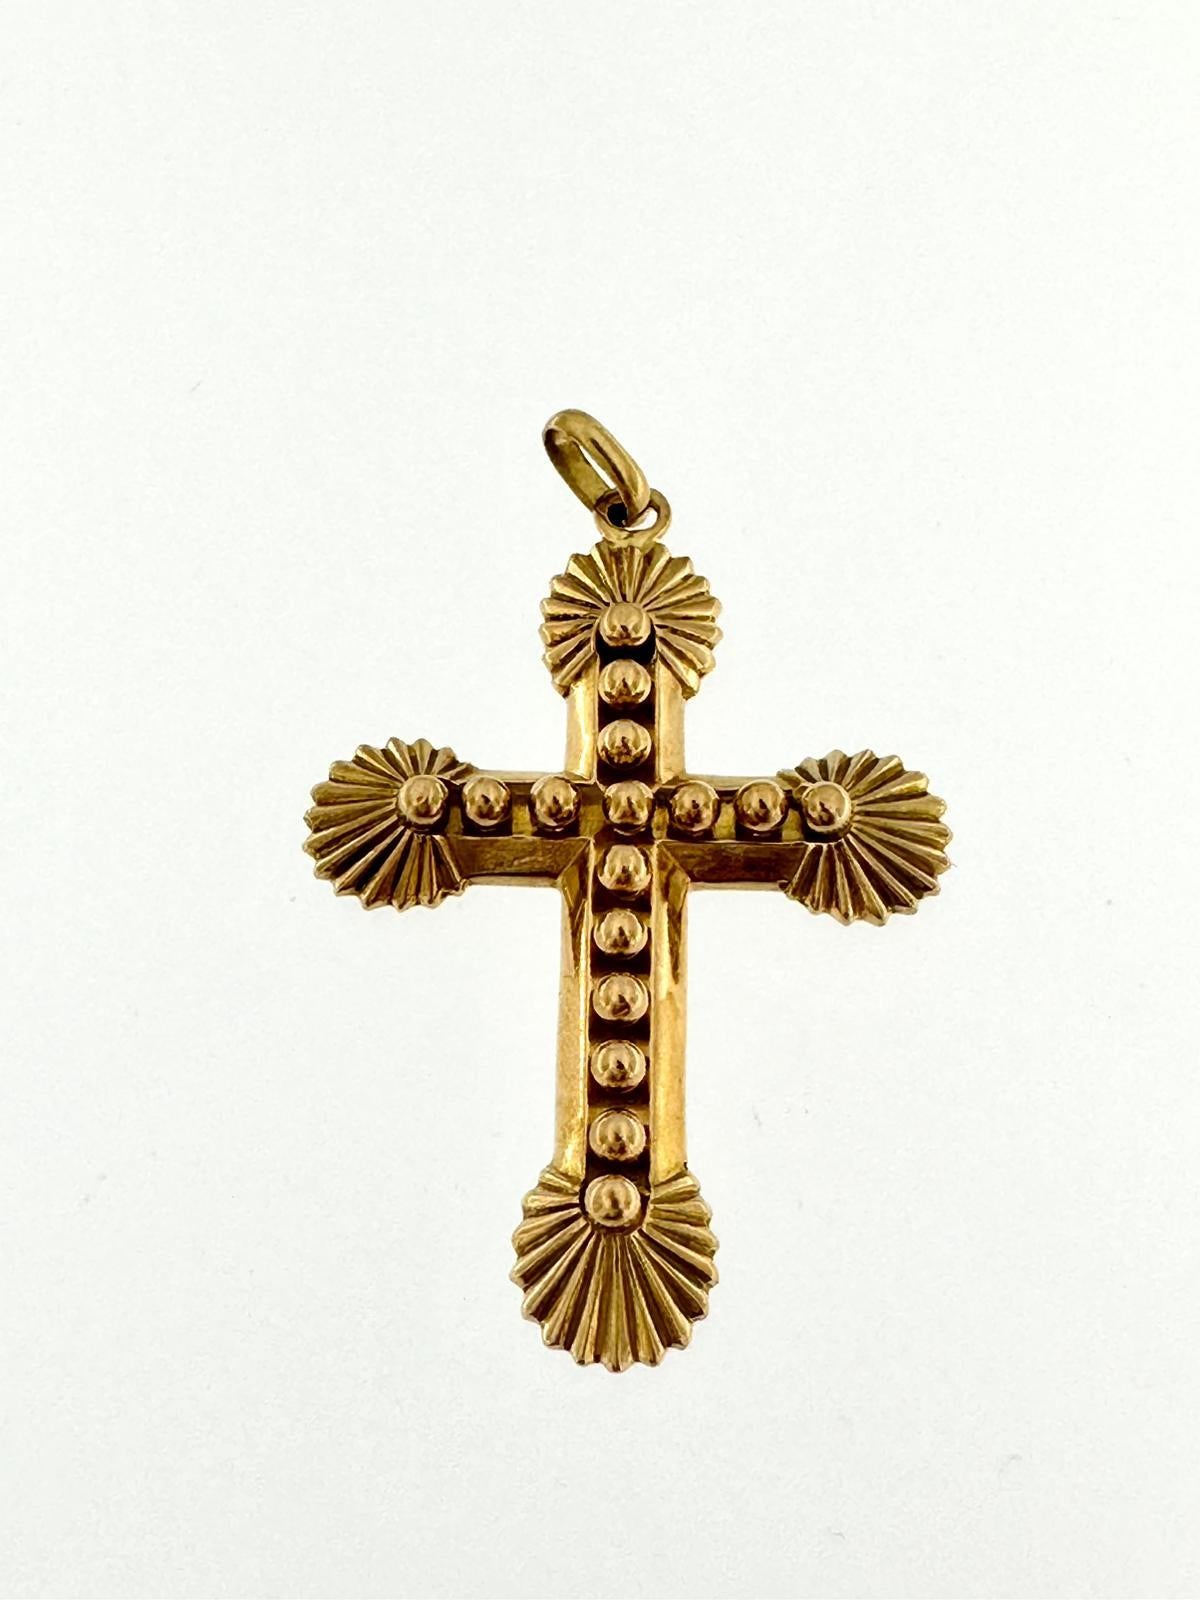 This Cross was crafted in Portugal in 18kt yellow gold. It has an orthodox Byzantine style due to the rounded beams ends. It has a cross-over-the-cross effect because it is decorated on the front with small spheres that form a cross. This type of